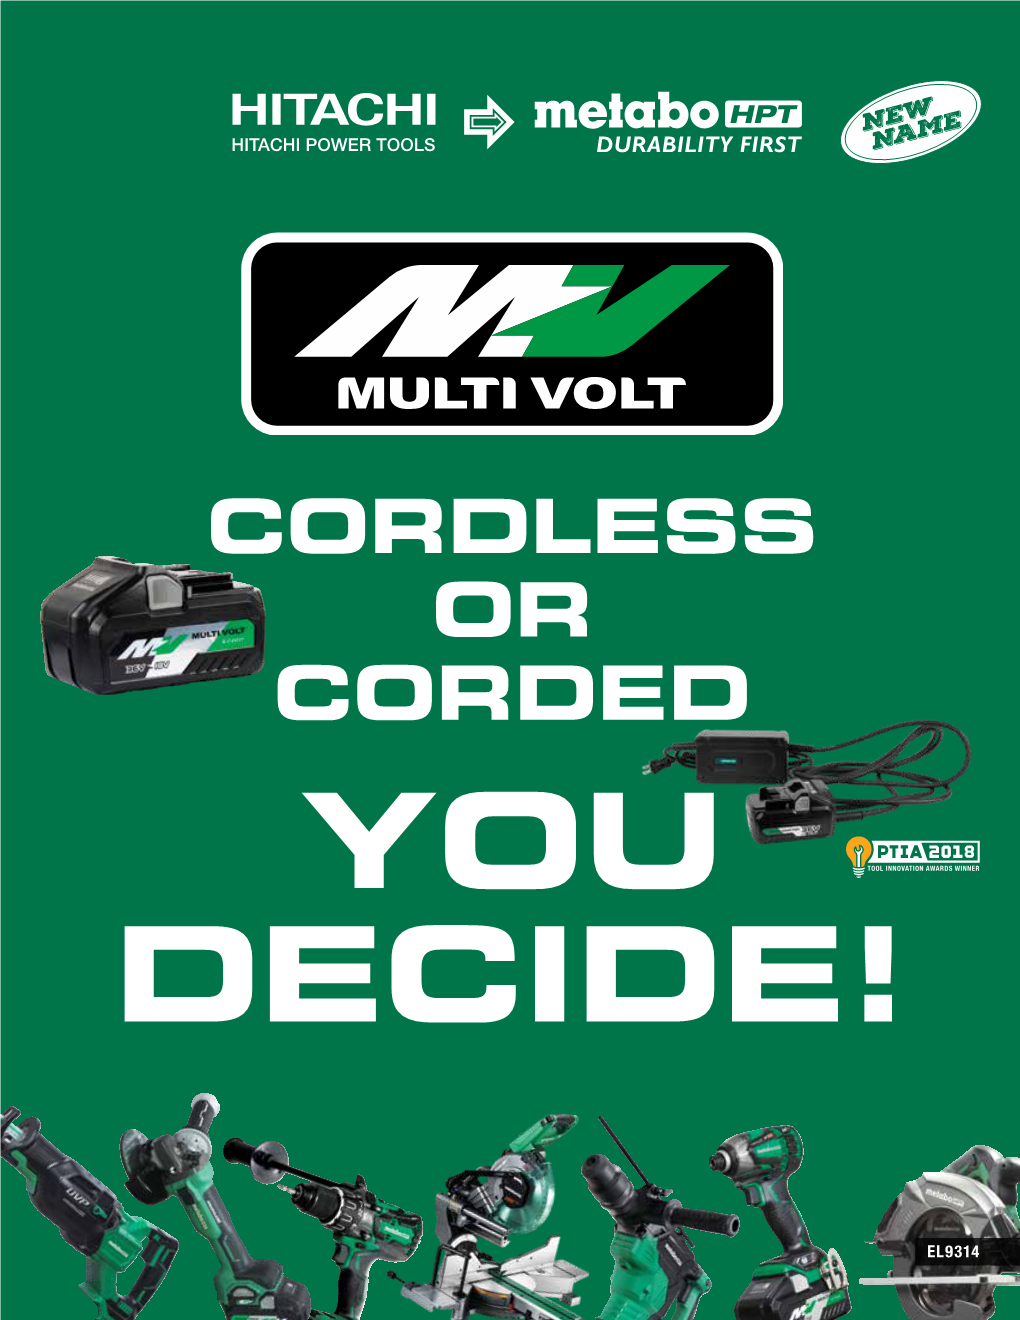 Cordless Or Corded You Decide!